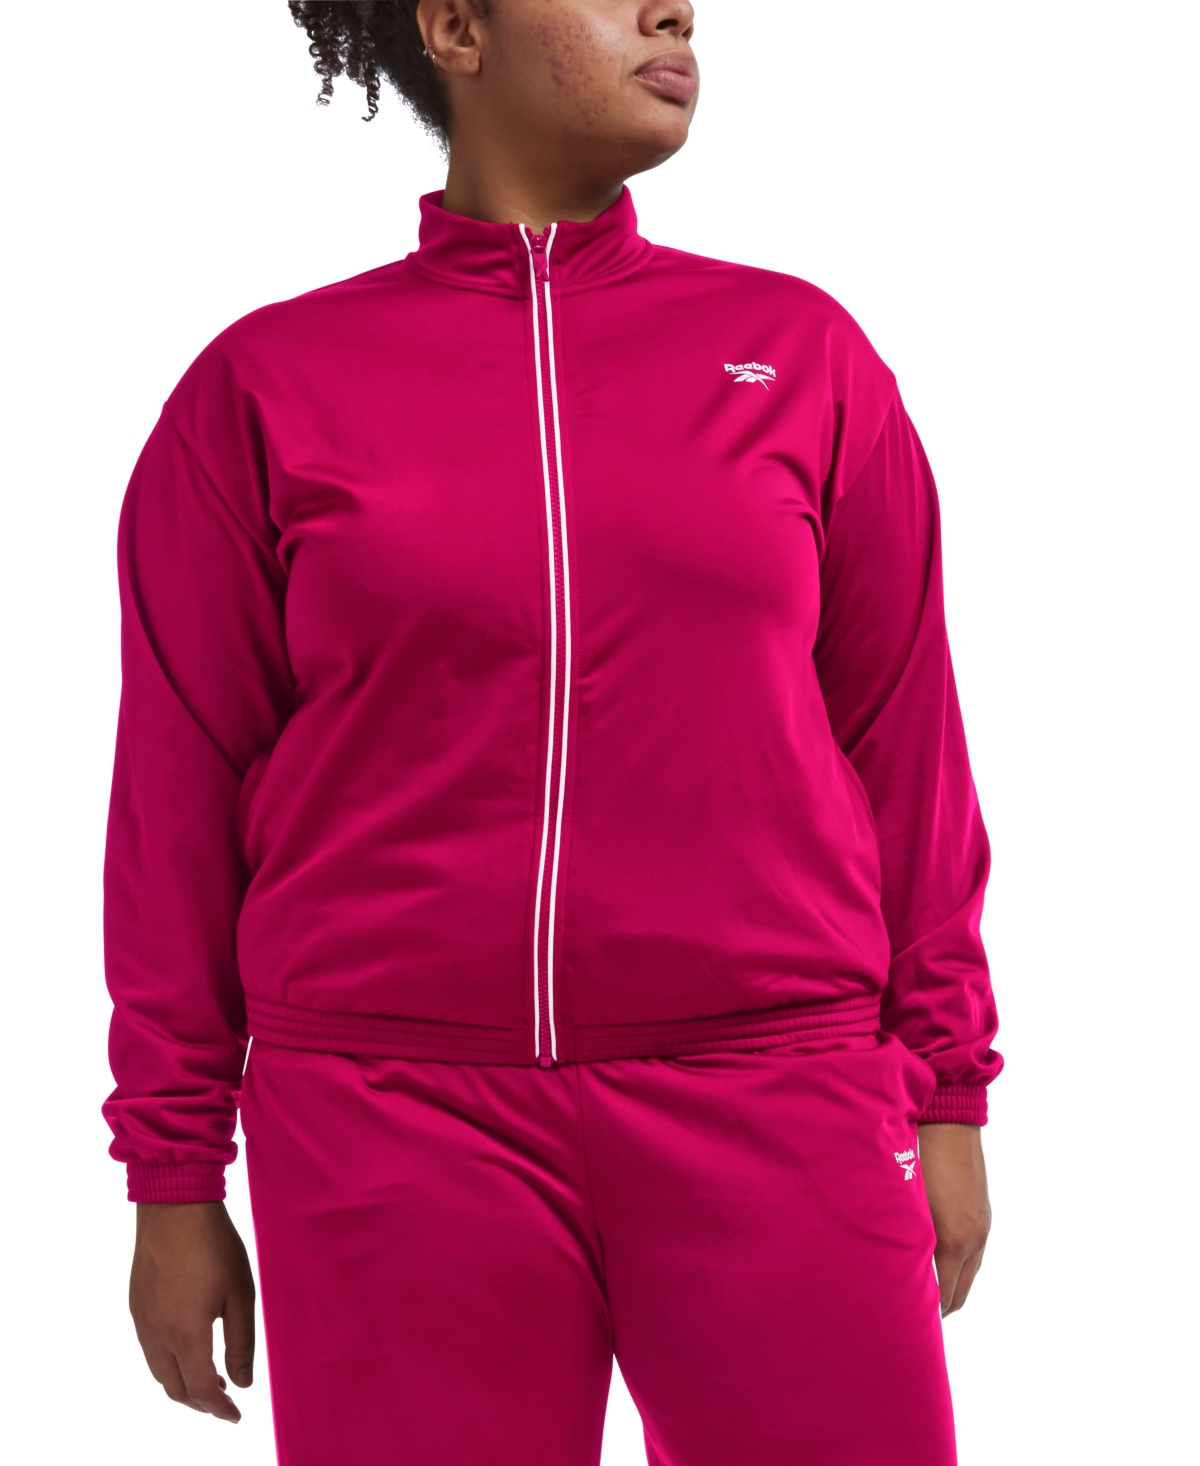 Plus Size Tricot Zip-Front Long-Sleeve Jacket - Brght Pink